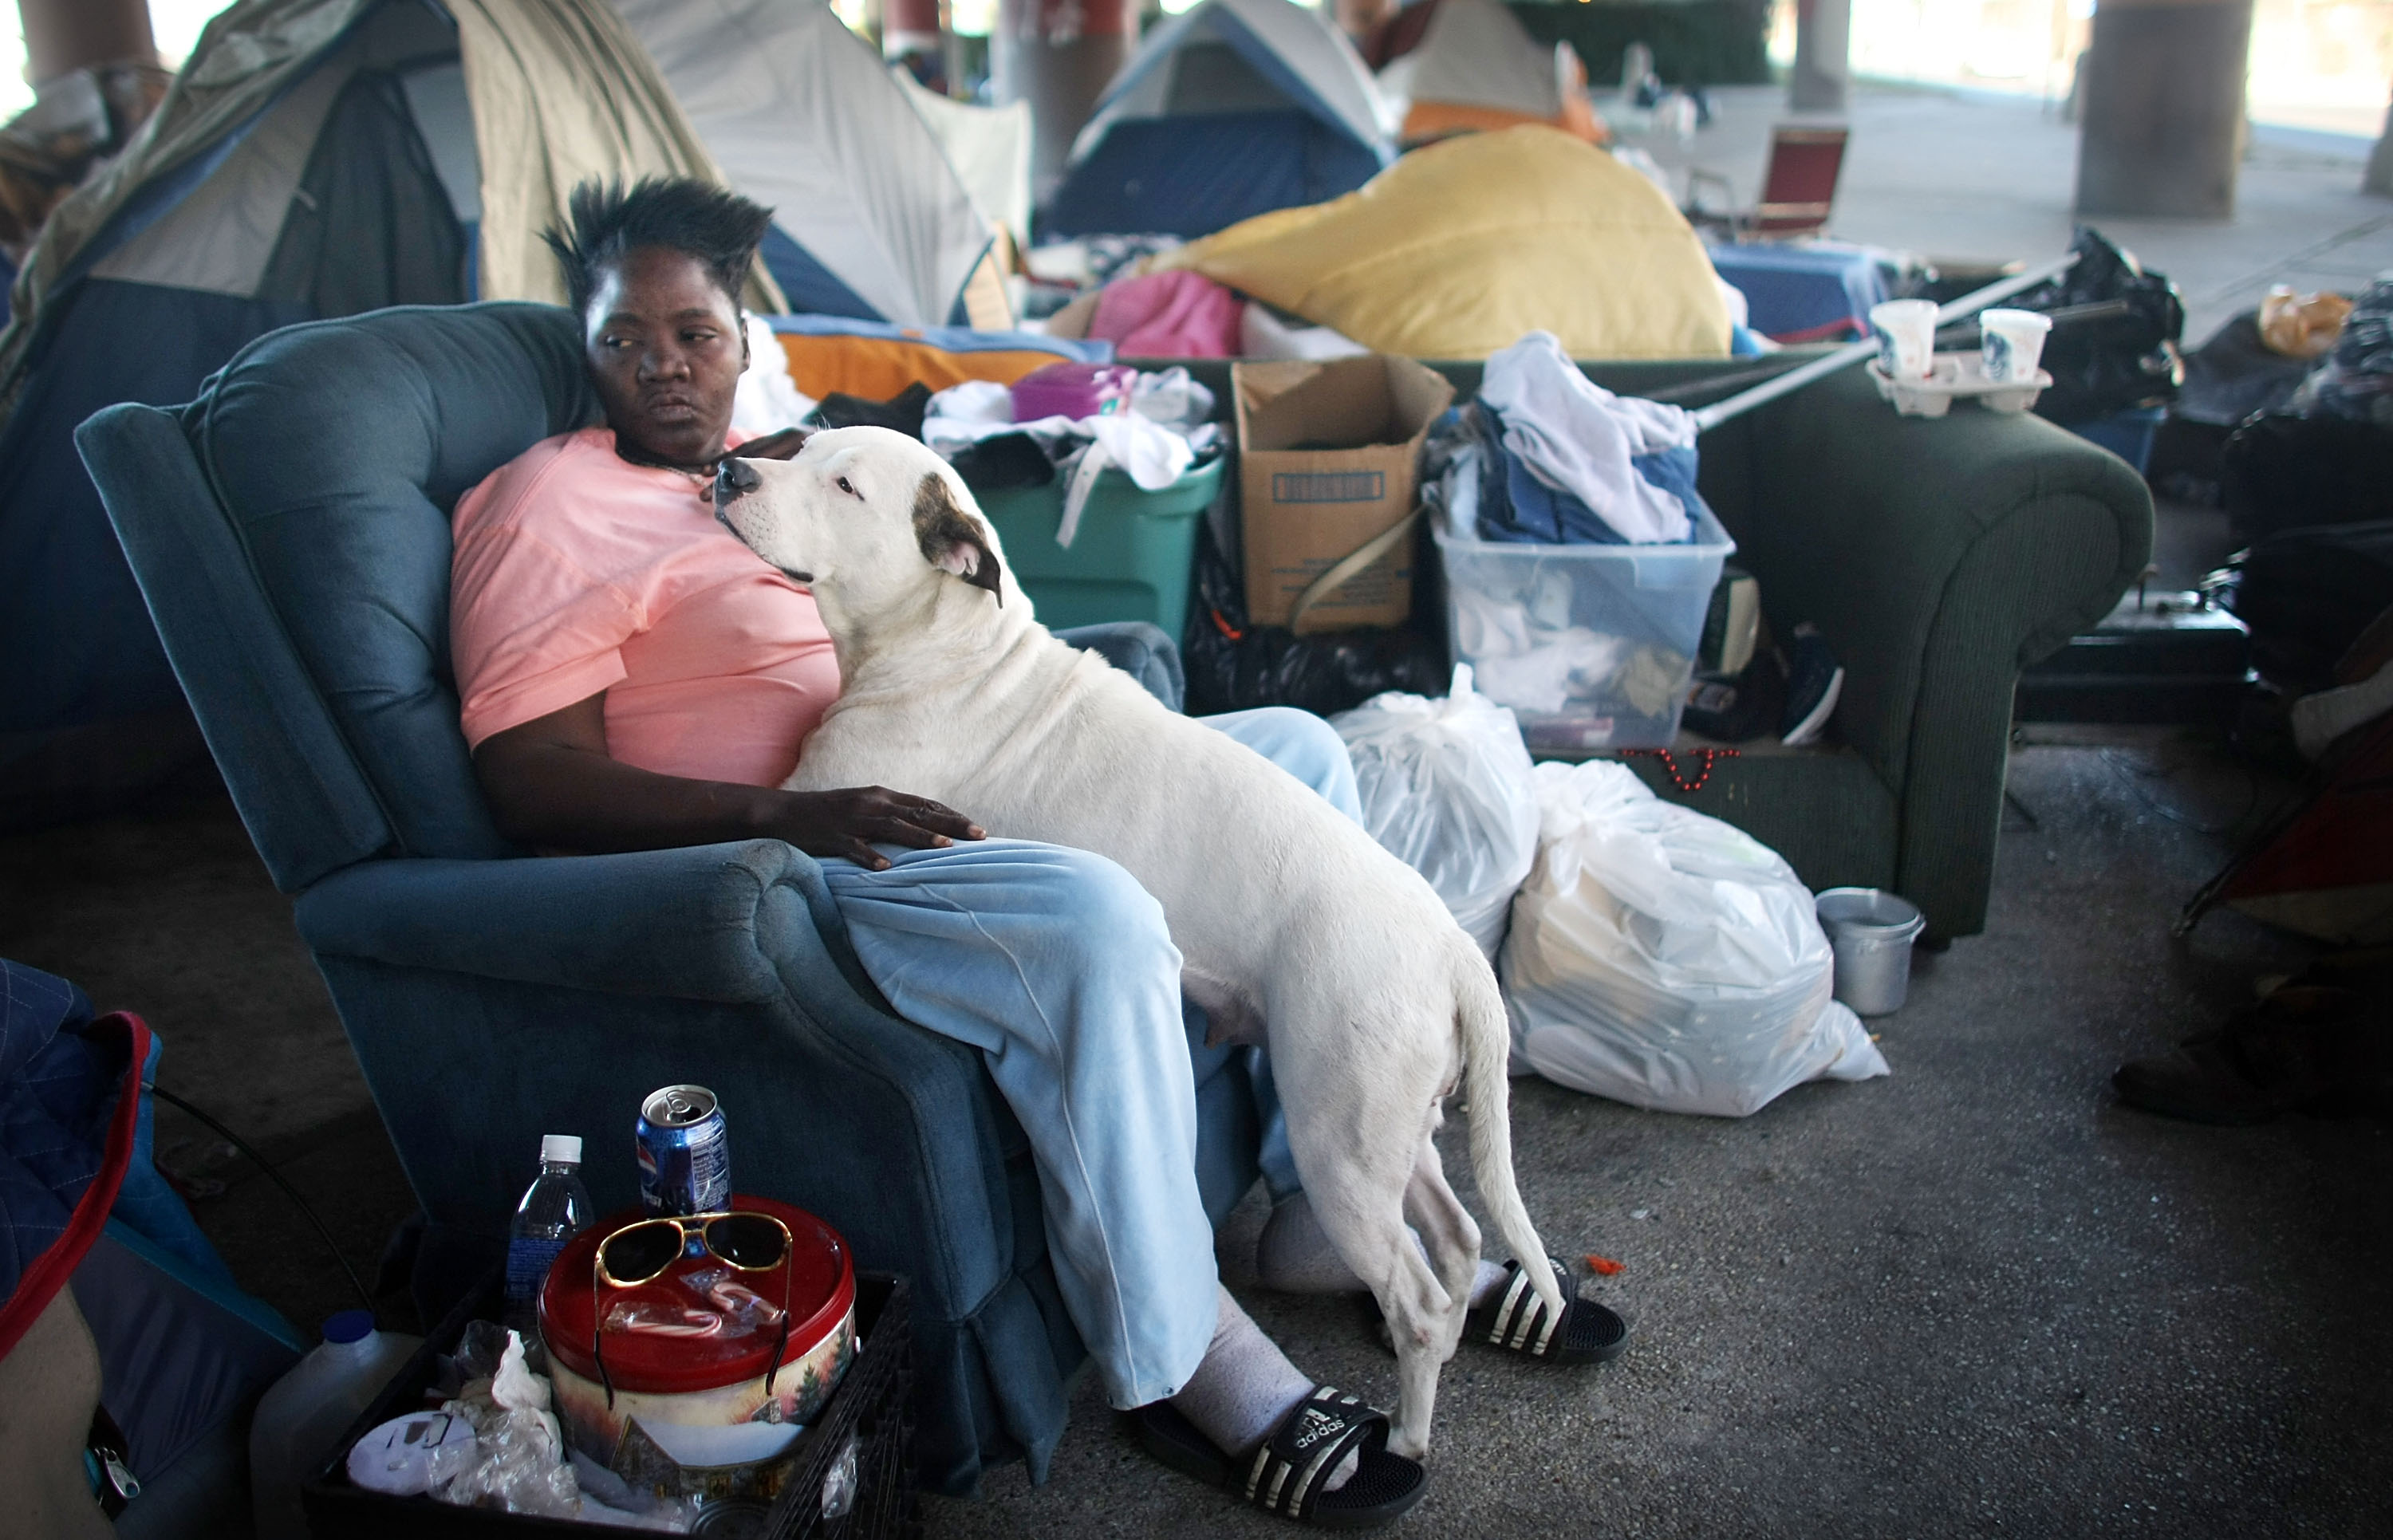 Homeless Population in New Orleans Doubles Following Katrina